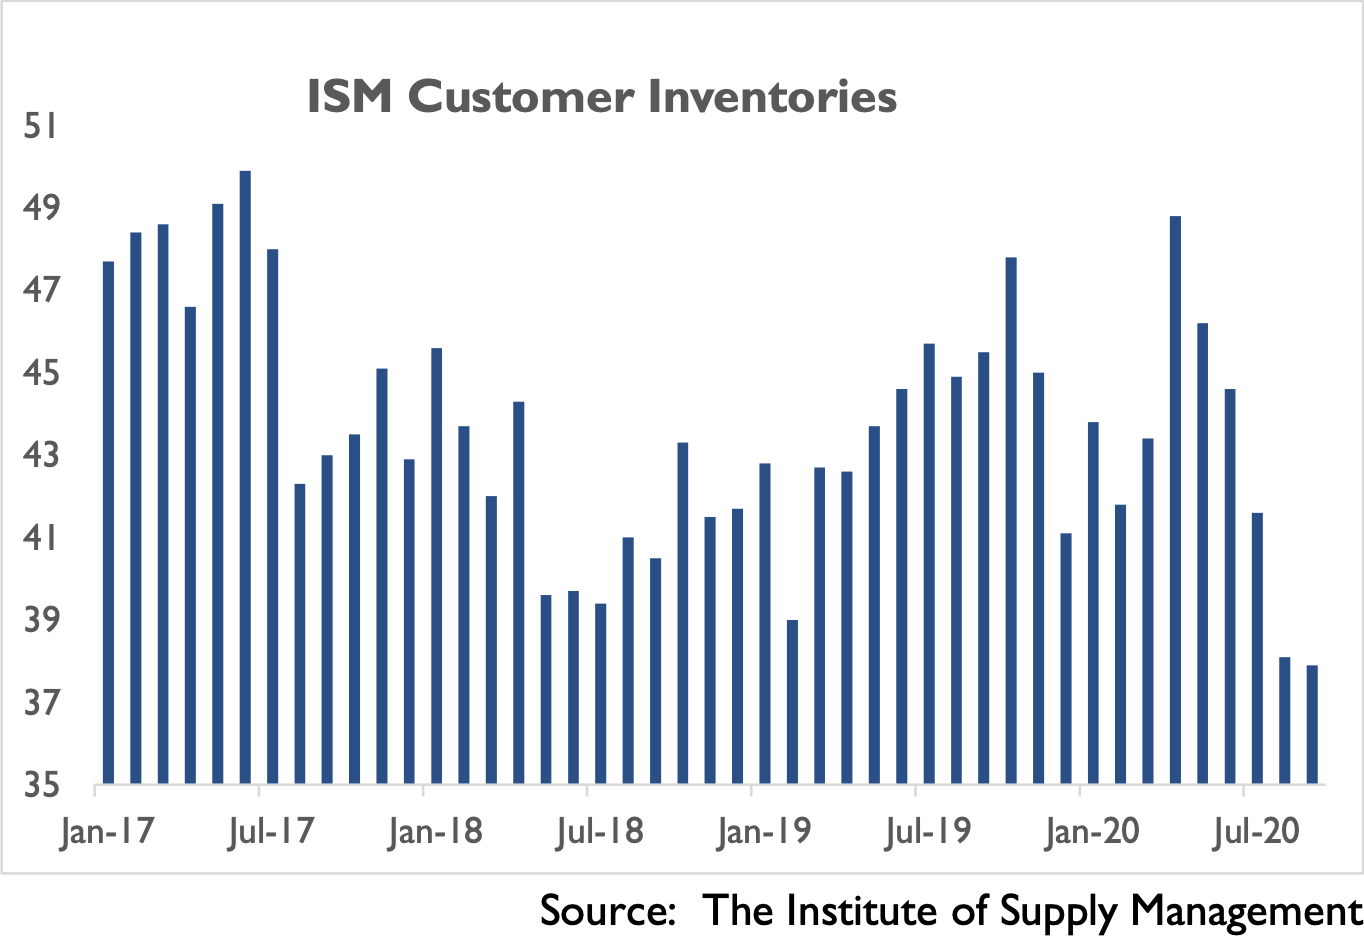 Chart - ISM Customer Inventories - Source: The Institute of Supply Management